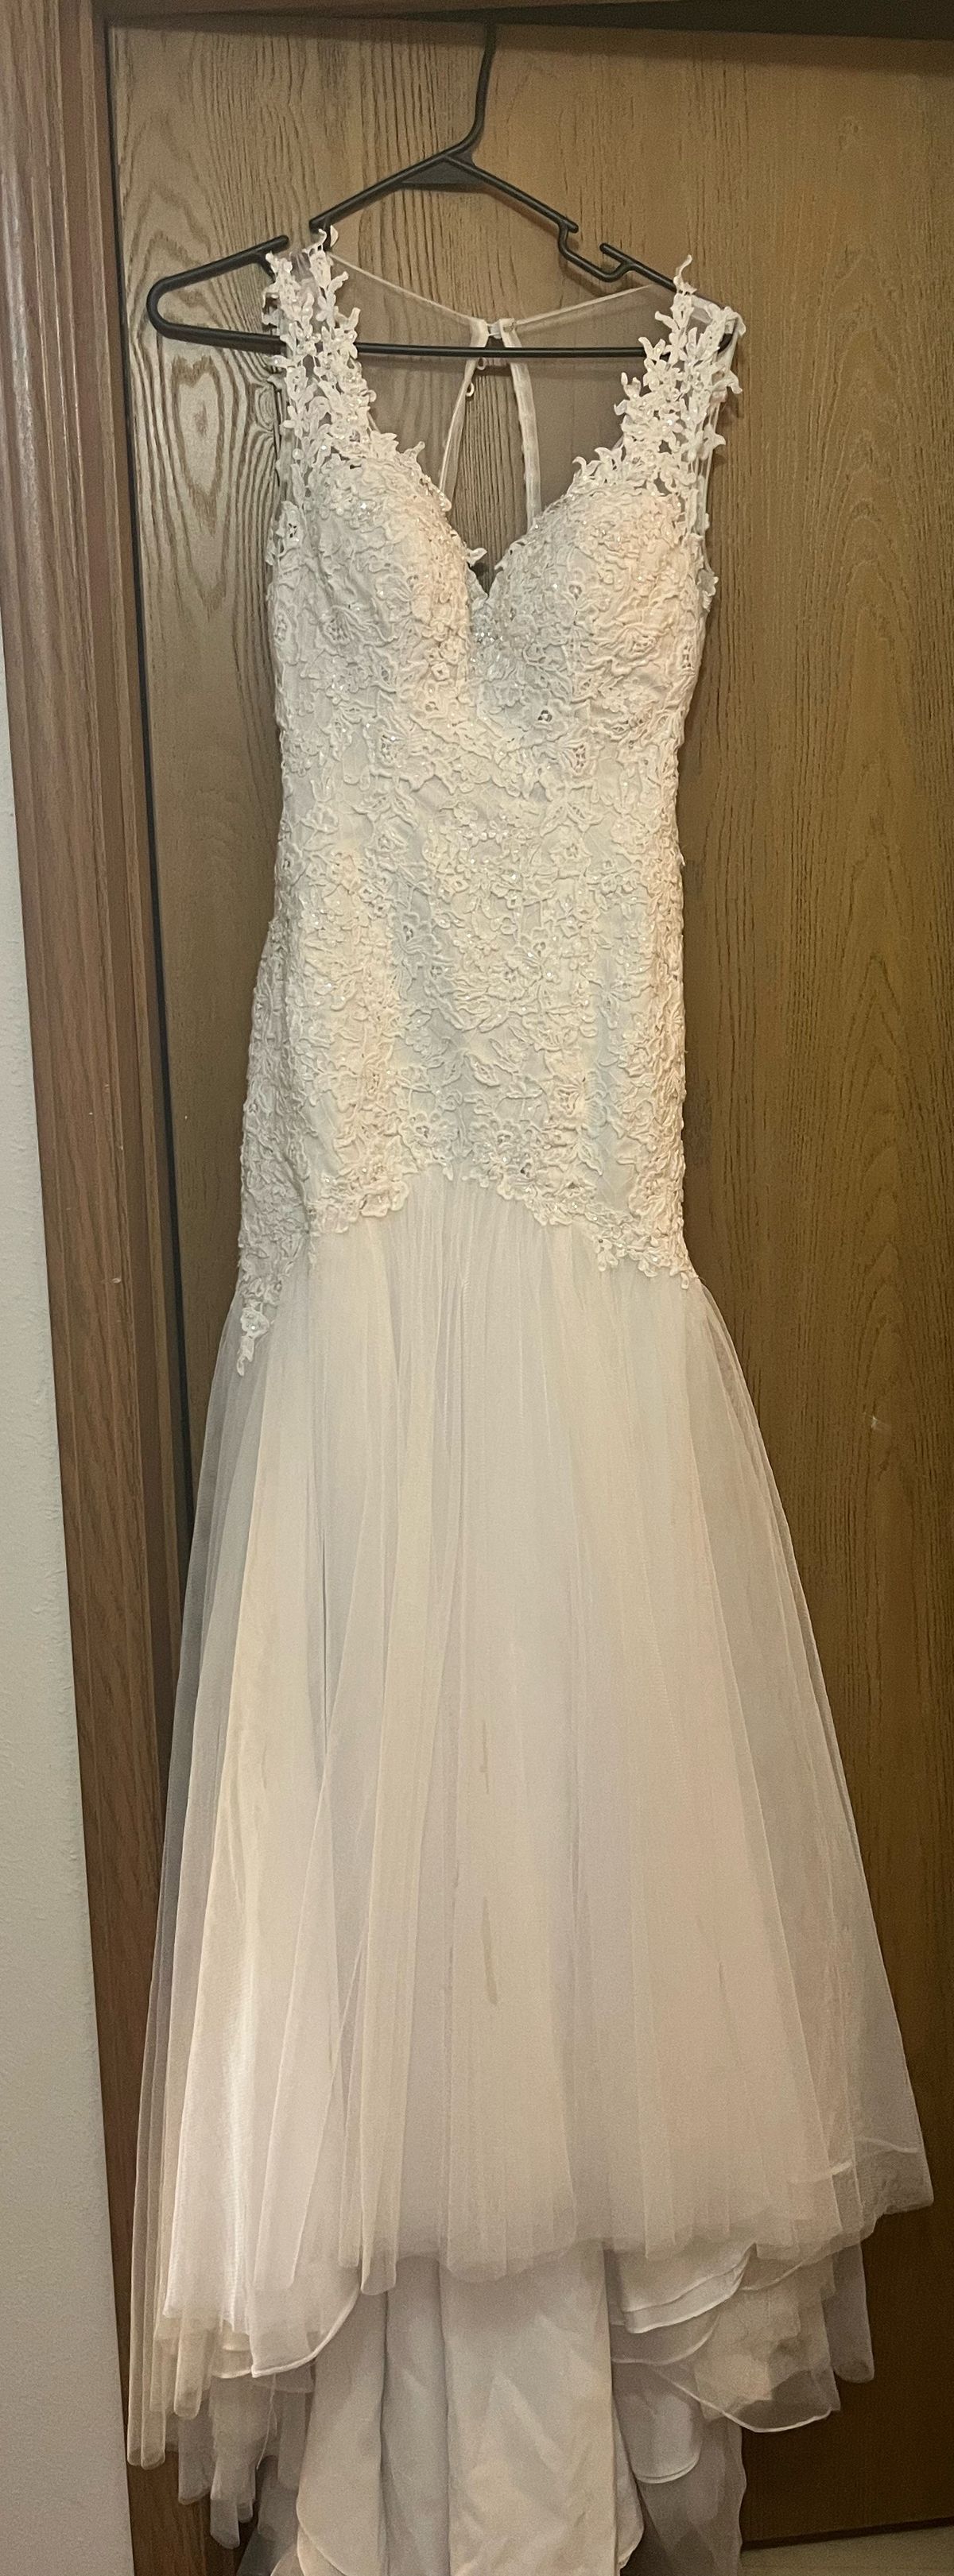 Signature Galina Size 2 Wedding White Mermaid Dress on Queenly